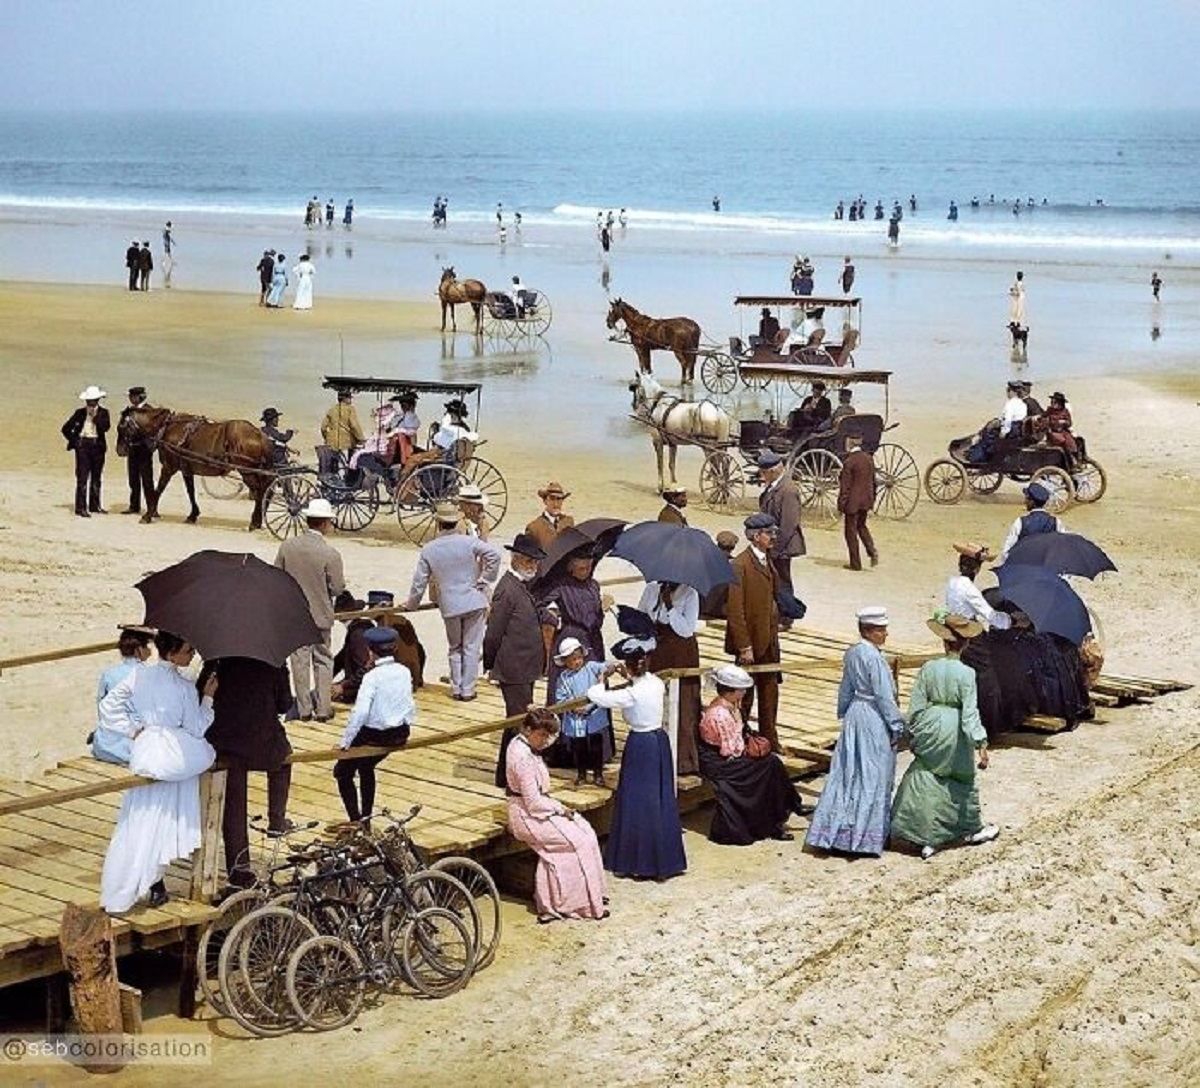 People At Daytona Beach In Florida, United States In 1904.